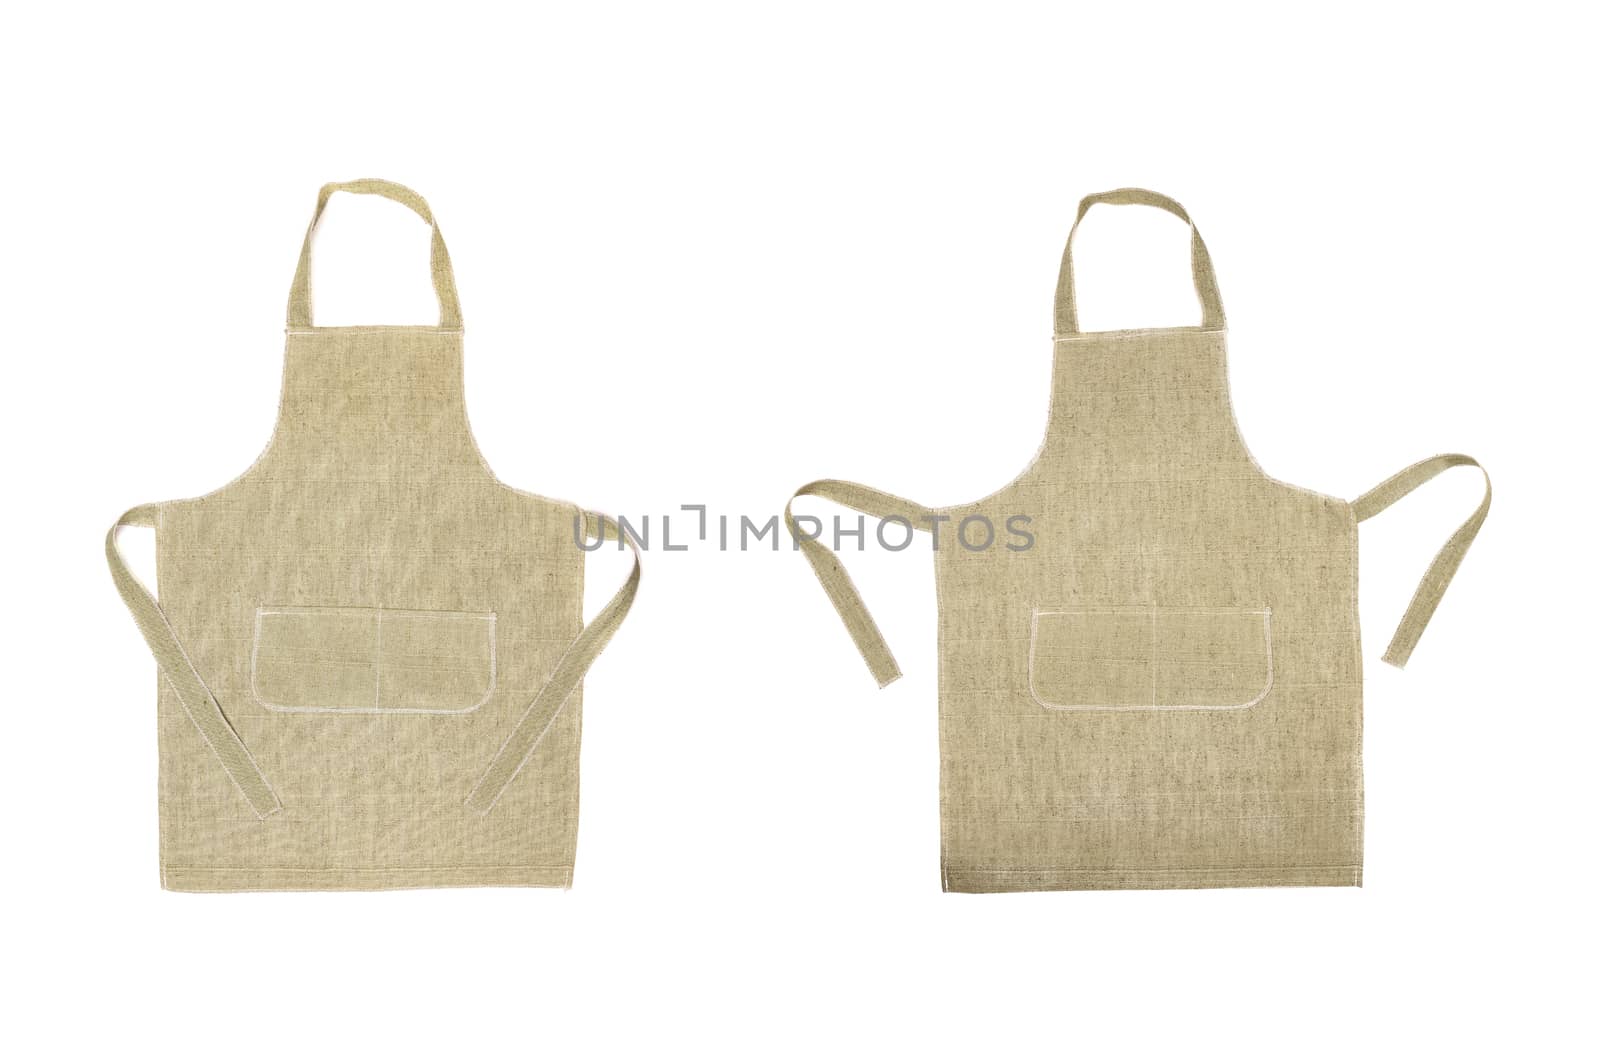 Two kitchen gray aprons. Front view. Isolated on a white background